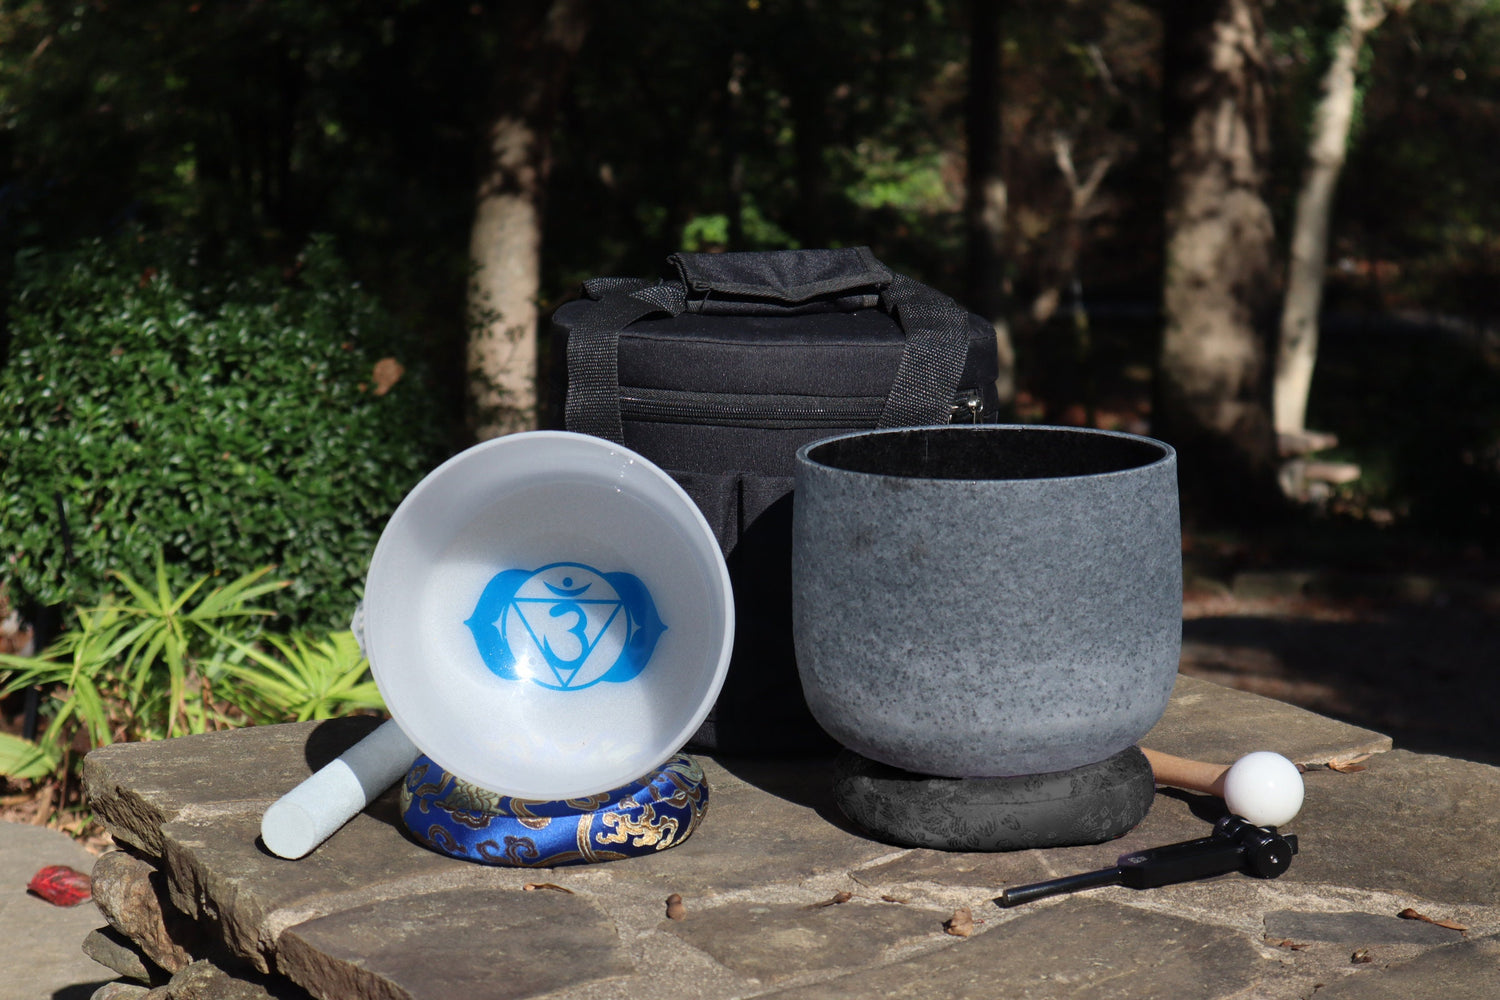 Obsidian Infused Perfect Pitch 8" Crystal Singing Bowl, 7" 3rd Eye Bowl, and 528 Hz Solfeggio Tuning Fork, Cushion, O-Ring, Carry Case